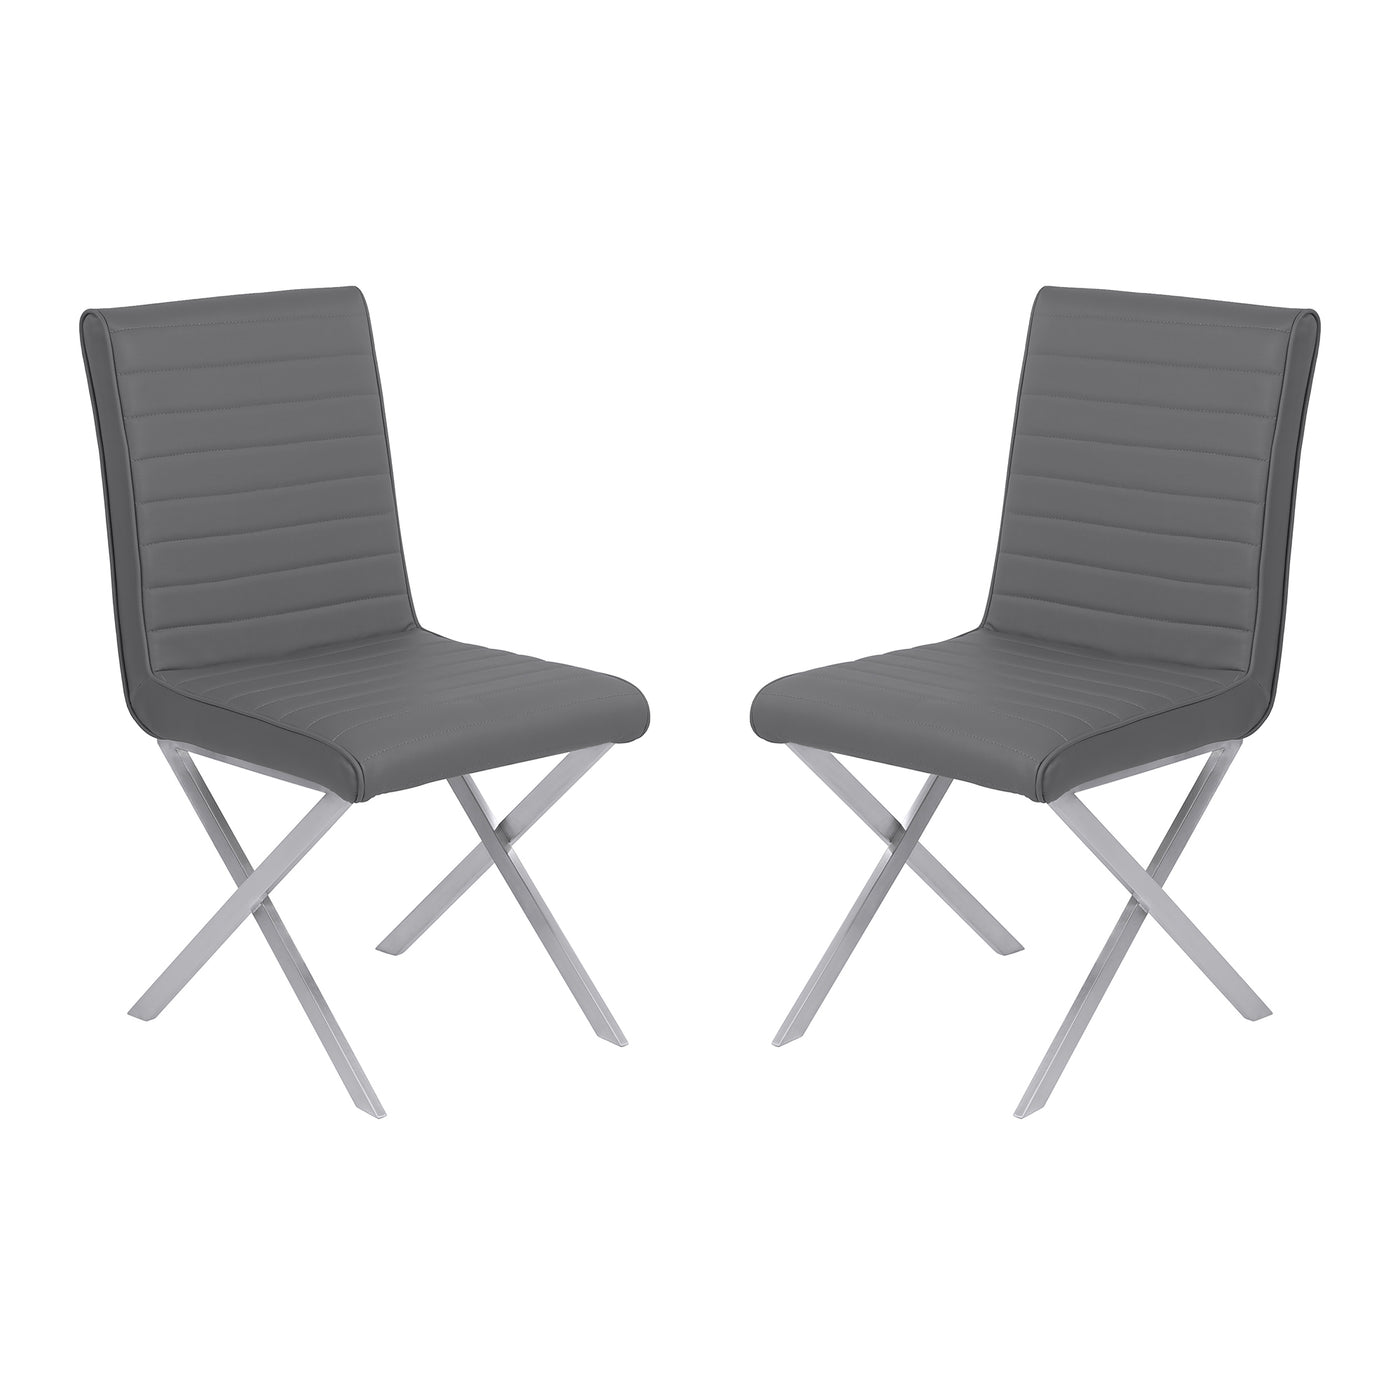 Tempe Dining Chair Set of 2